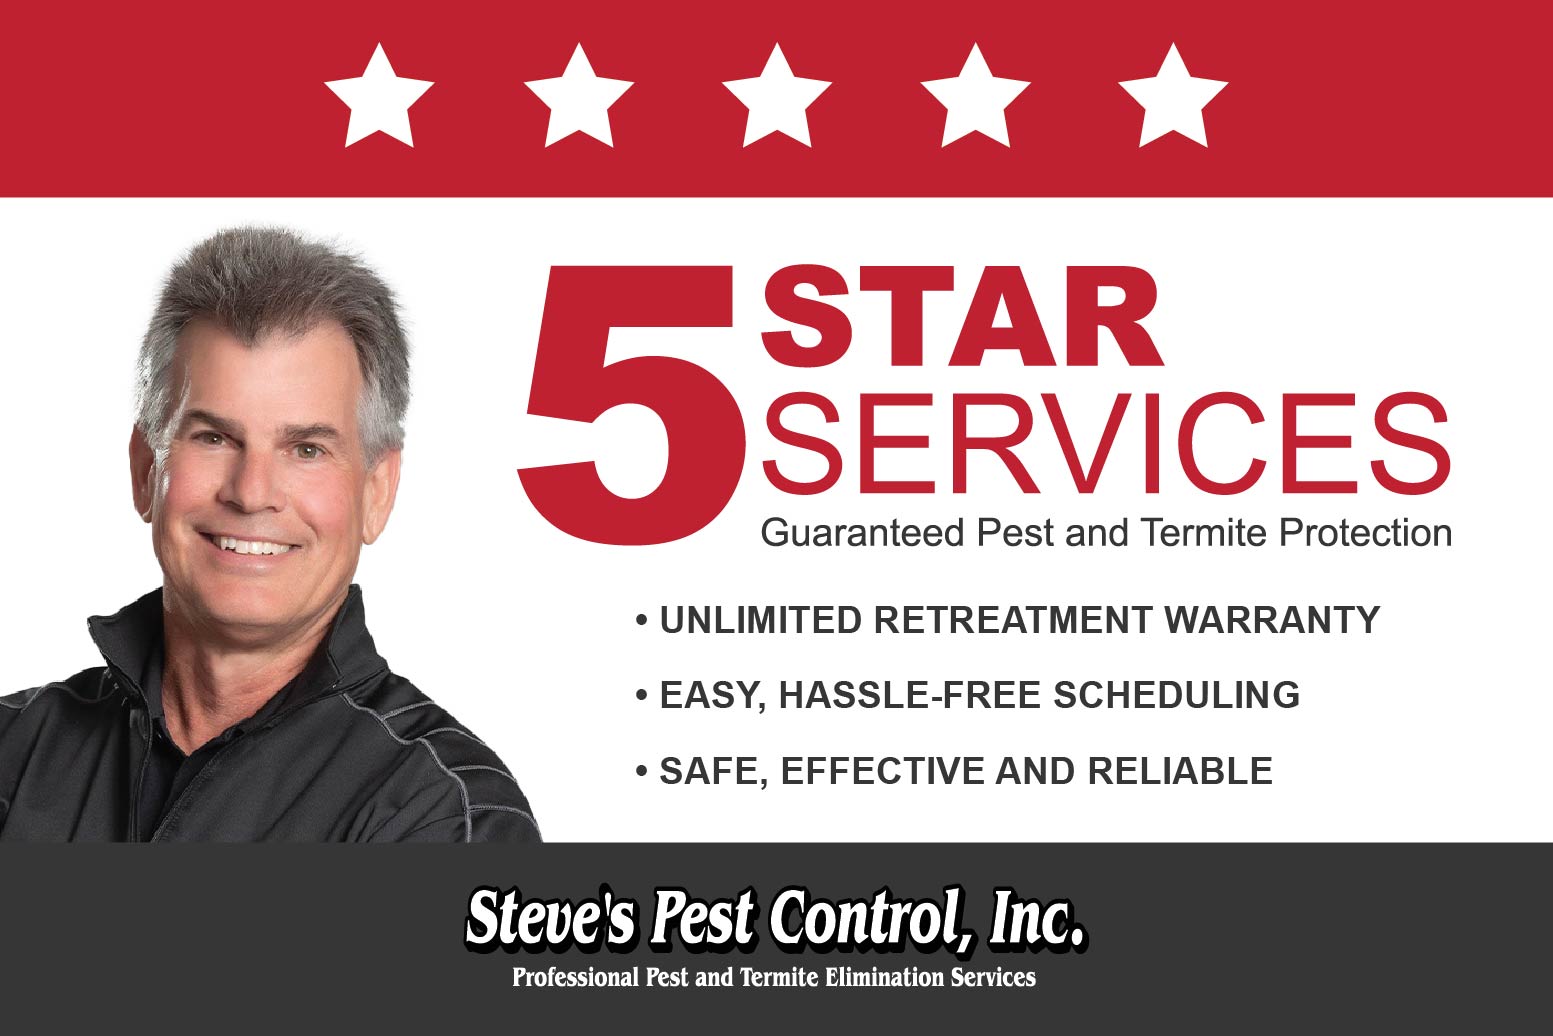 5 Star Services in Mid-Missouri From Steve's Pest Control